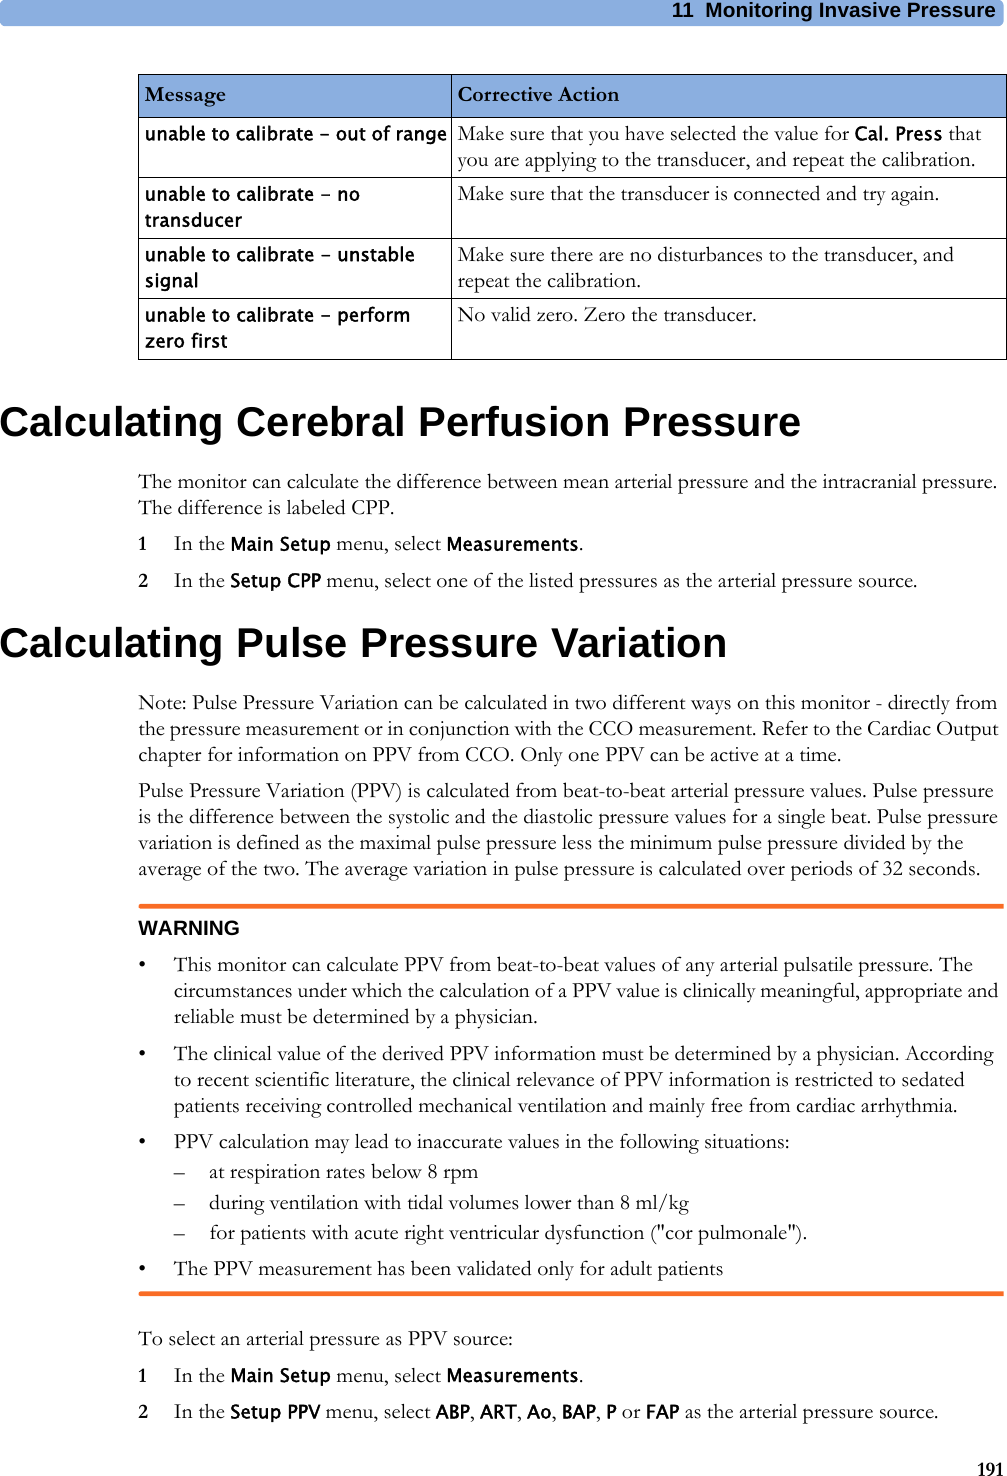 11 Monitoring Invasive Pressure191Calculating Cerebral Perfusion PressureThe monitor can calculate the difference between mean arterial pressure and the intracranial pressure. The difference is labeled CPP.1In the Main Setup menu, select Measurements.2In the Setup CPP menu, select one of the listed pressures as the arterial pressure source.Calculating Pulse Pressure VariationNote: Pulse Pressure Variation can be calculated in two different ways on this monitor - directly from the pressure measurement or in conjunction with the CCO measurement. Refer to the Cardiac Output chapter for information on PPV from CCO. Only one PPV can be active at a time.Pulse Pressure Variation (PPV) is calculated from beat-to-beat arterial pressure values. Pulse pressure is the difference between the systolic and the diastolic pressure values for a single beat. Pulse pressure variation is defined as the maximal pulse pressure less the minimum pulse pressure divided by the average of the two. The average variation in pulse pressure is calculated over periods of 32 seconds.WARNING• This monitor can calculate PPV from beat-to-beat values of any arterial pulsatile pressure. The circumstances under which the calculation of a PPV value is clinically meaningful, appropriate and reliable must be determined by a physician.• The clinical value of the derived PPV information must be determined by a physician. According to recent scientific literature, the clinical relevance of PPV information is restricted to sedated patients receiving controlled mechanical ventilation and mainly free from cardiac arrhythmia.• PPV calculation may lead to inaccurate values in the following situations:– at respiration rates below 8 rpm– during ventilation with tidal volumes lower than 8 ml/kg– for patients with acute right ventricular dysfunction (&quot;cor pulmonale&quot;).• The PPV measurement has been validated only for adult patientsTo select an arterial pressure as PPV source:1In the Main Setup menu, select Measurements.2In the Setup PPV menu, select ABP, ART, Ao, BAP, P or FAP as the arterial pressure source.unable to calibrate - out of range Make sure that you have selected the value for Cal. Press that you are applying to the transducer, and repeat the calibration.unable to calibrate - no transducerMake sure that the transducer is connected and try again.unable to calibrate - unstable signalMake sure there are no disturbances to the transducer, and repeat the calibration.unable to calibrate - perform zero firstNo valid zero. Zero the transducer.Message Corrective Action